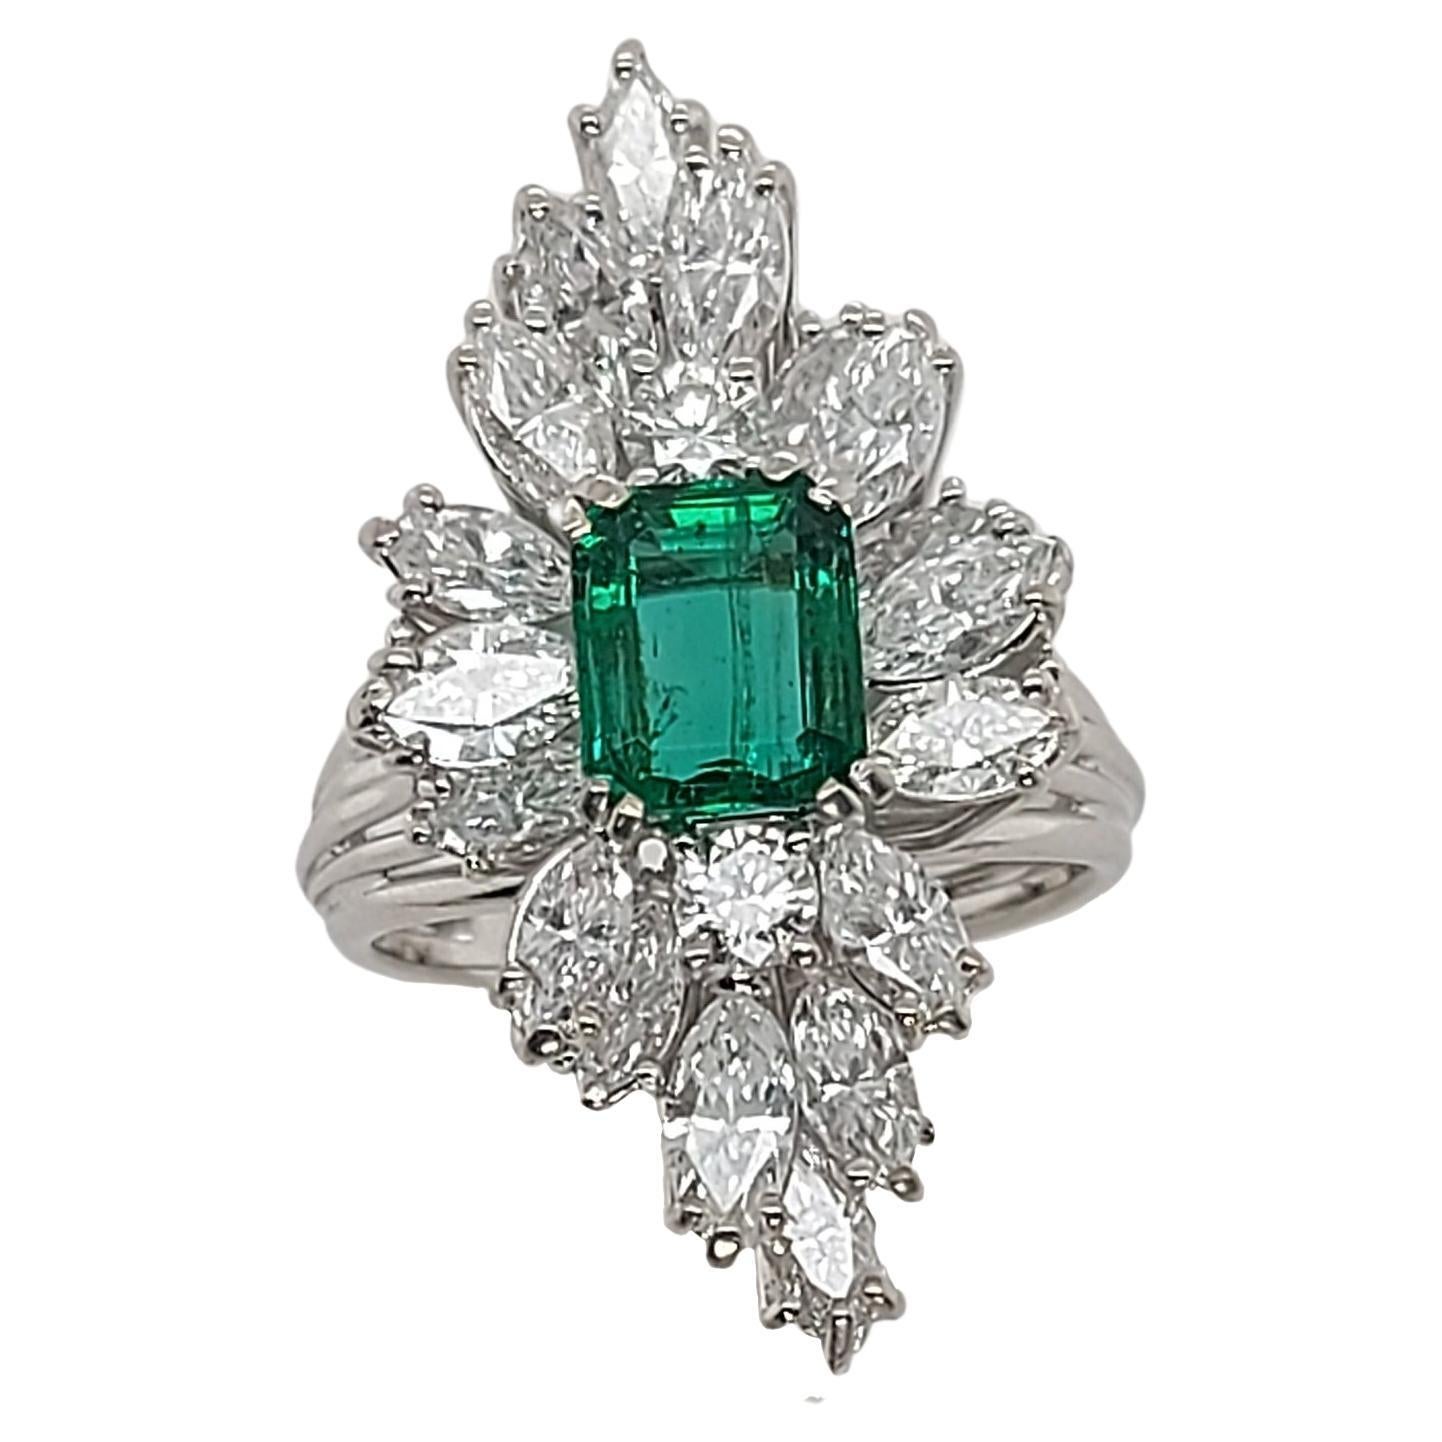 Elegant 18kt White Gold Ring with 1.49 ct Emerald Stone surrounded by Diamonds.

Emerald: Emerald, 1.49 Ct, octagonal shape, 7.84 x 6.60 x 3.40 mm, with CGL certificate

Diamonds: 17 Diamonds + 2 Brilliant cut diamonds

Material: 18kt White